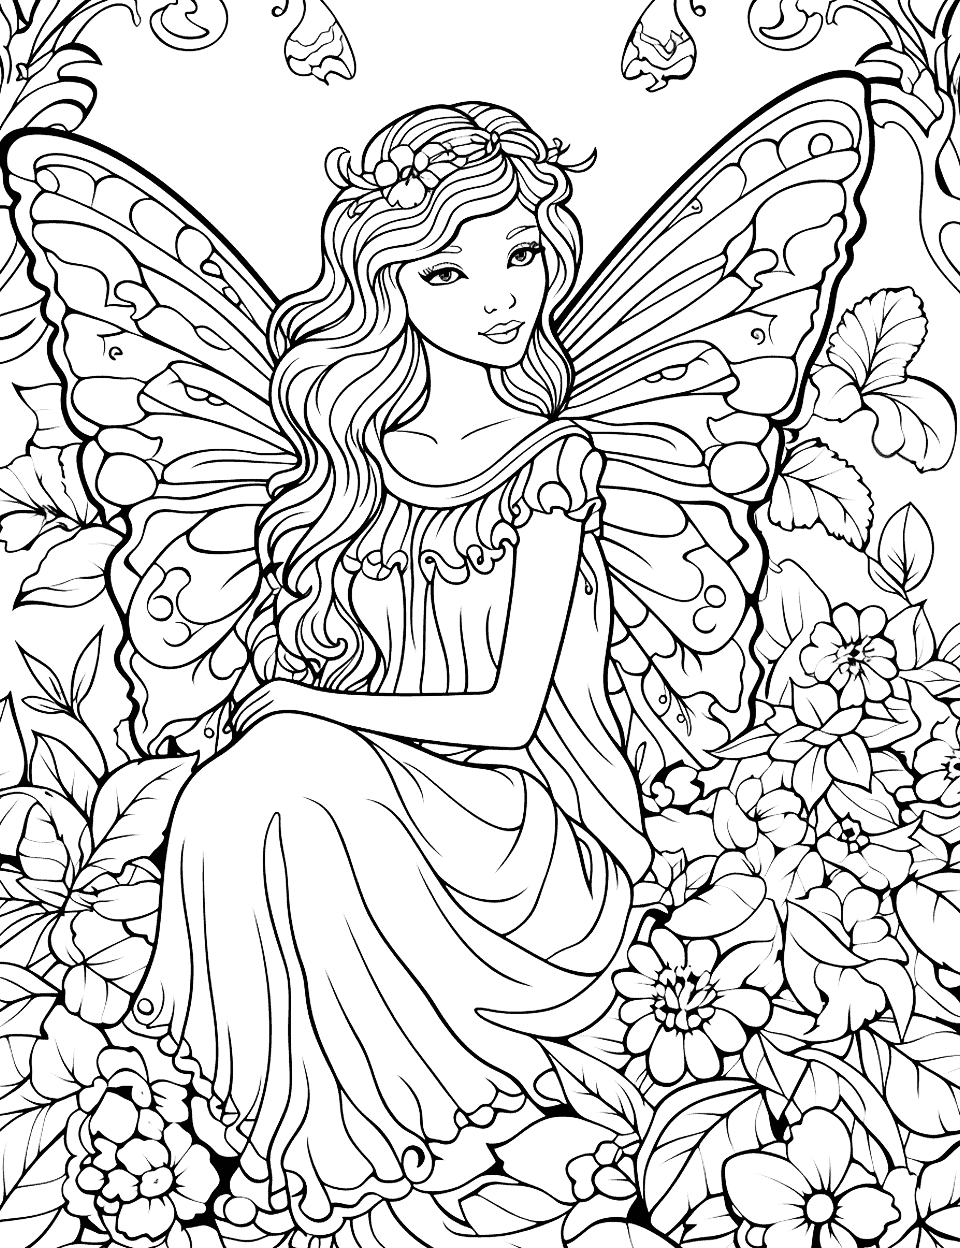 Garden Fairy Adult Coloring Page - A detailed fairy sitting in a lush garden, surrounded by blooming flowers.